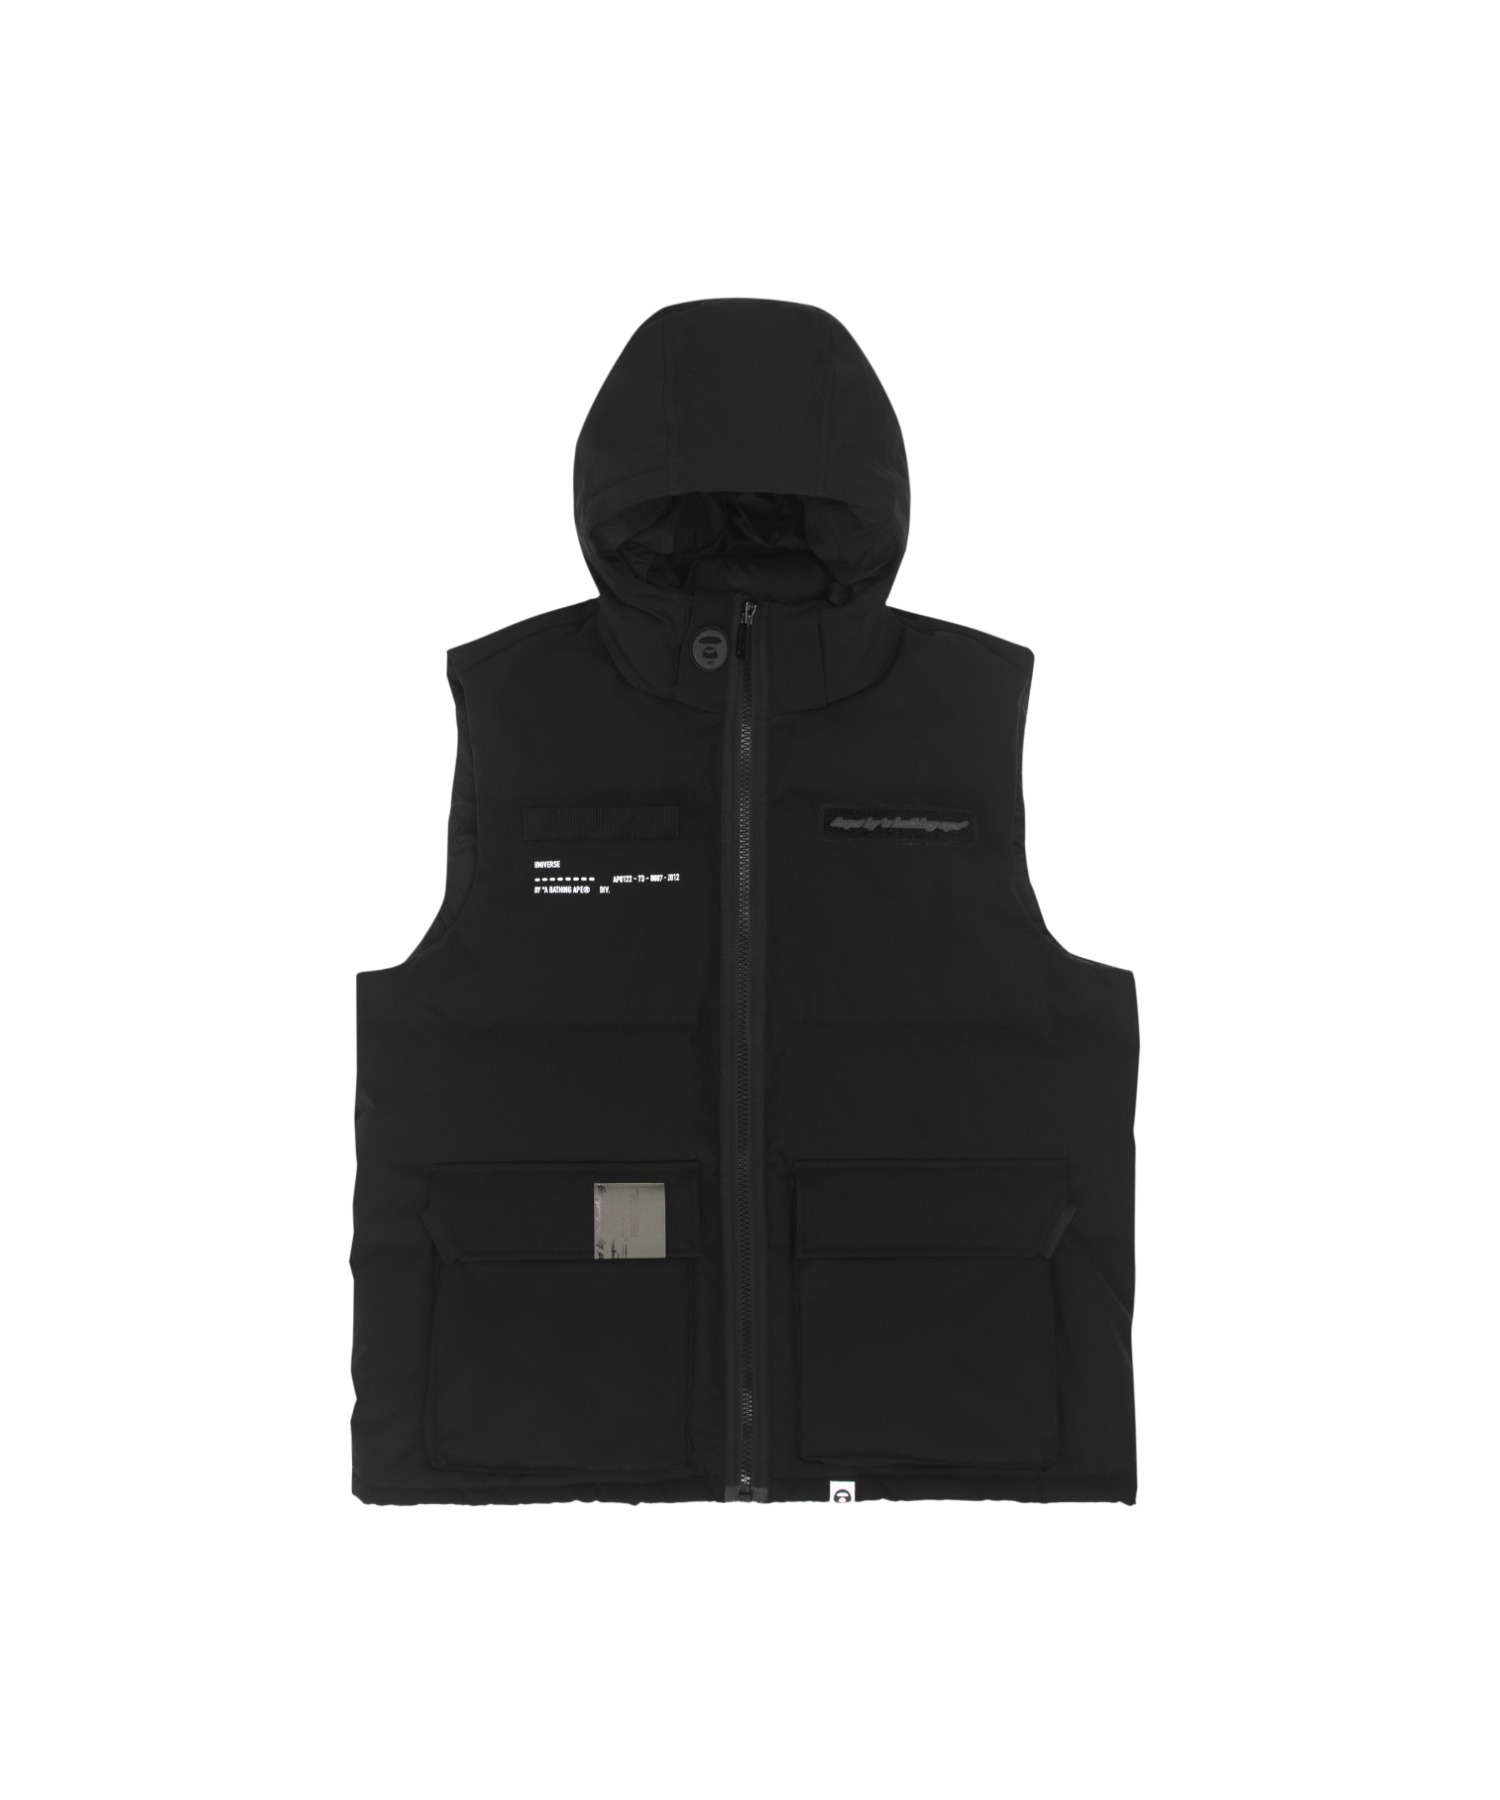 AAPE BY 【SALE／86%OFF】 A BATHING DOWN VEST 送料無料 即納 APEAAPE